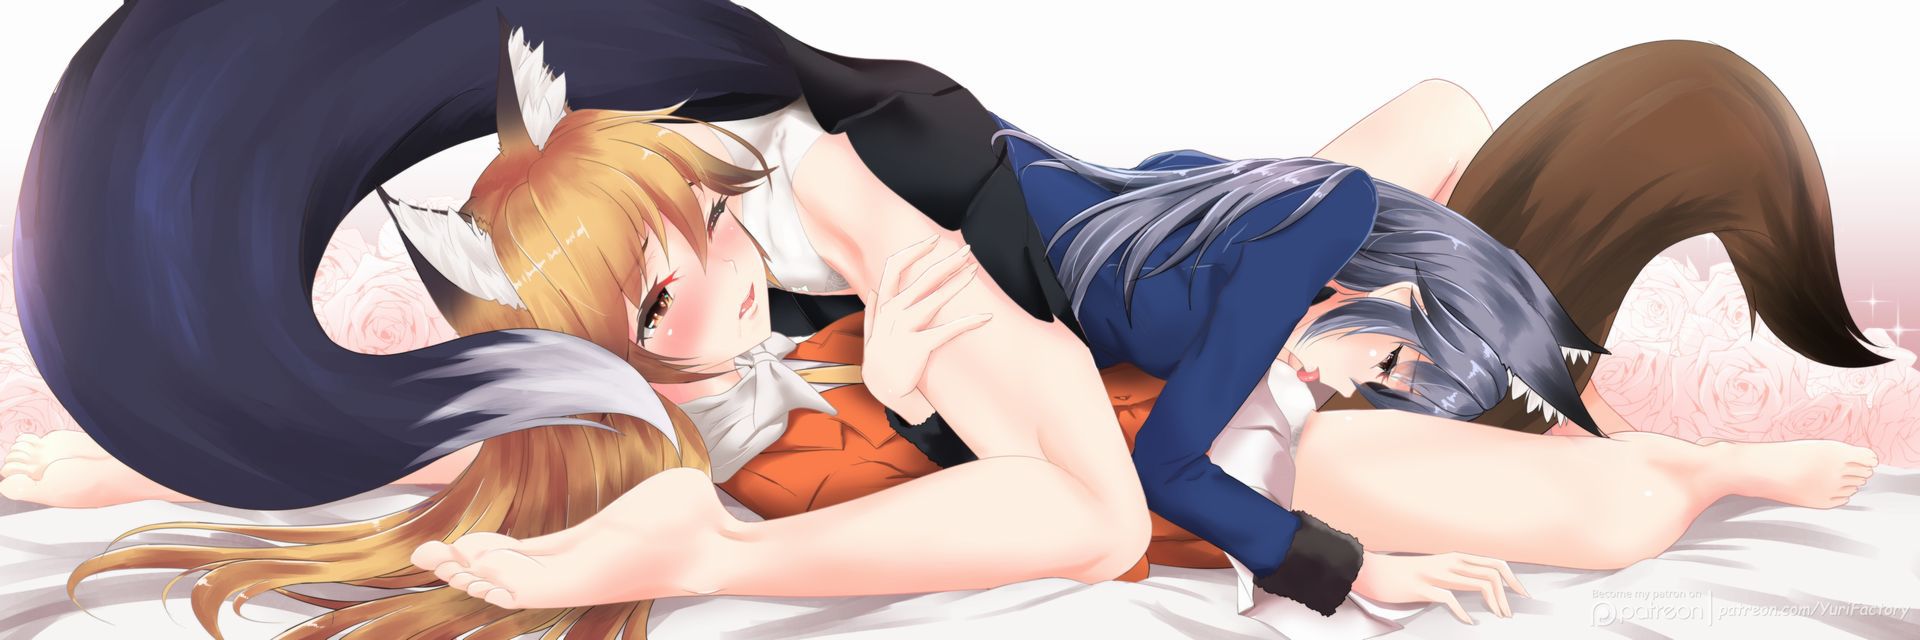 [secondary/ZIP] lovely yuri Lesbian image of a cute girl each other 31